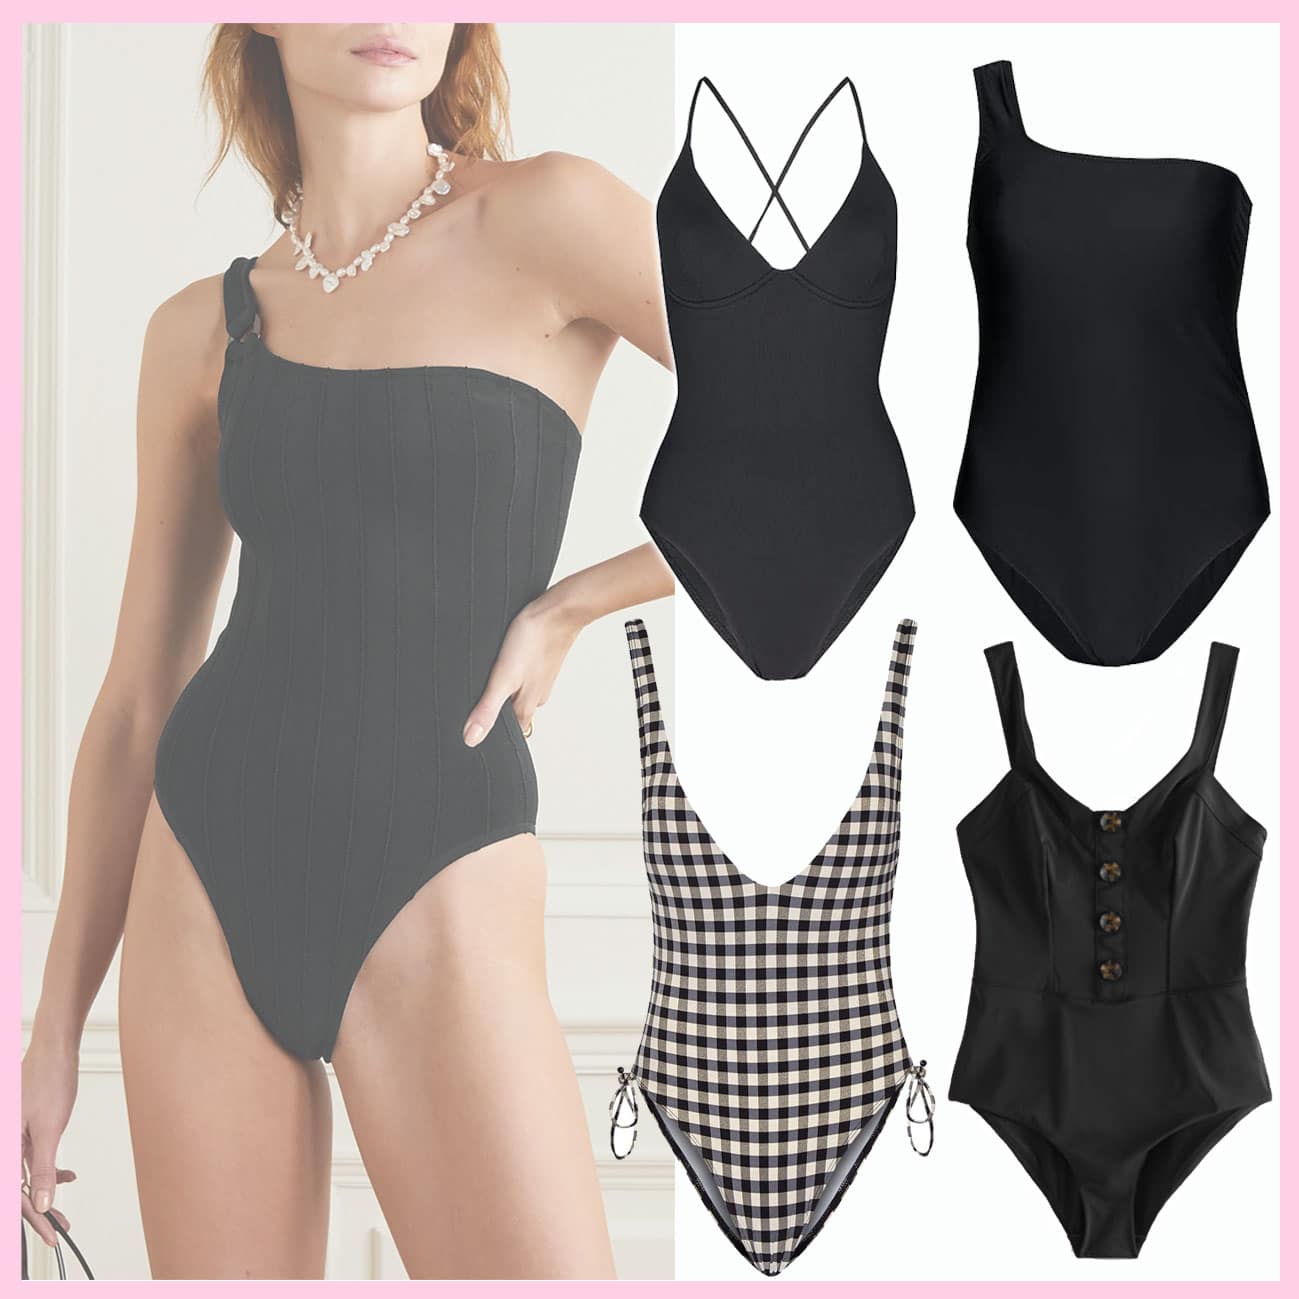 12 Black Swimsuits That Don’t Make You Feel Mumsy